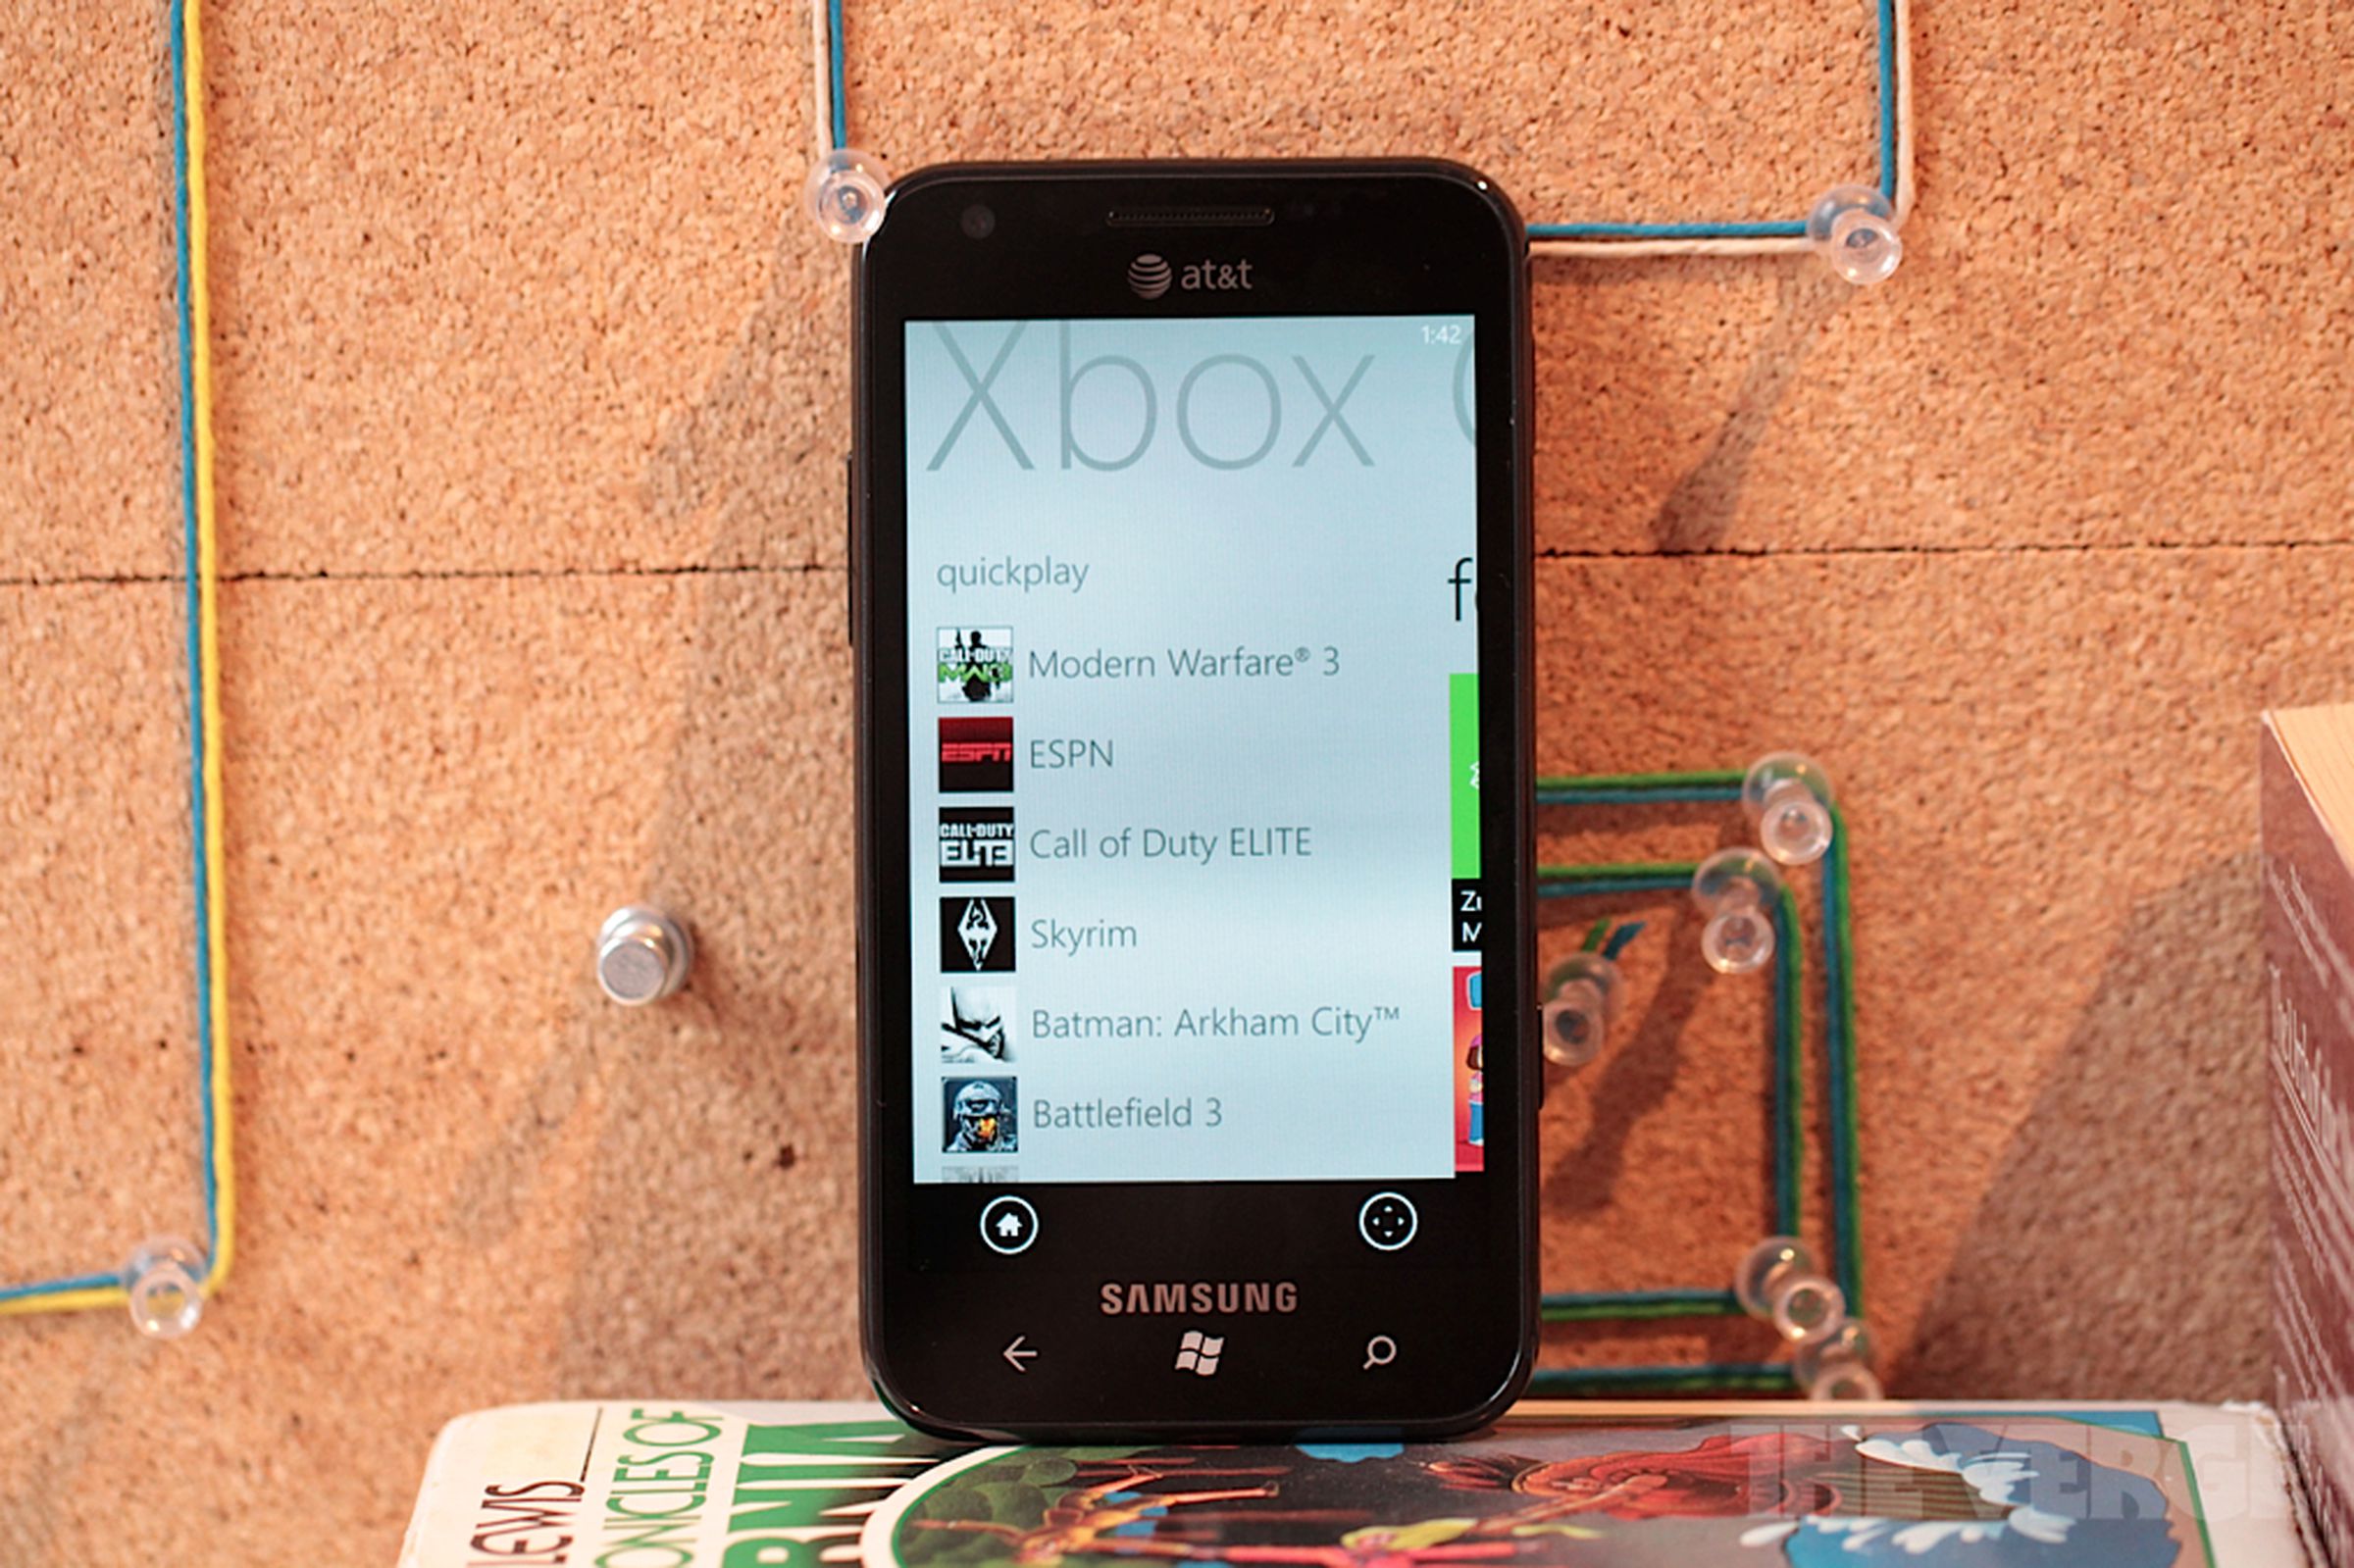 Xbox Companion for Windows Phone hands-on pictures and press images